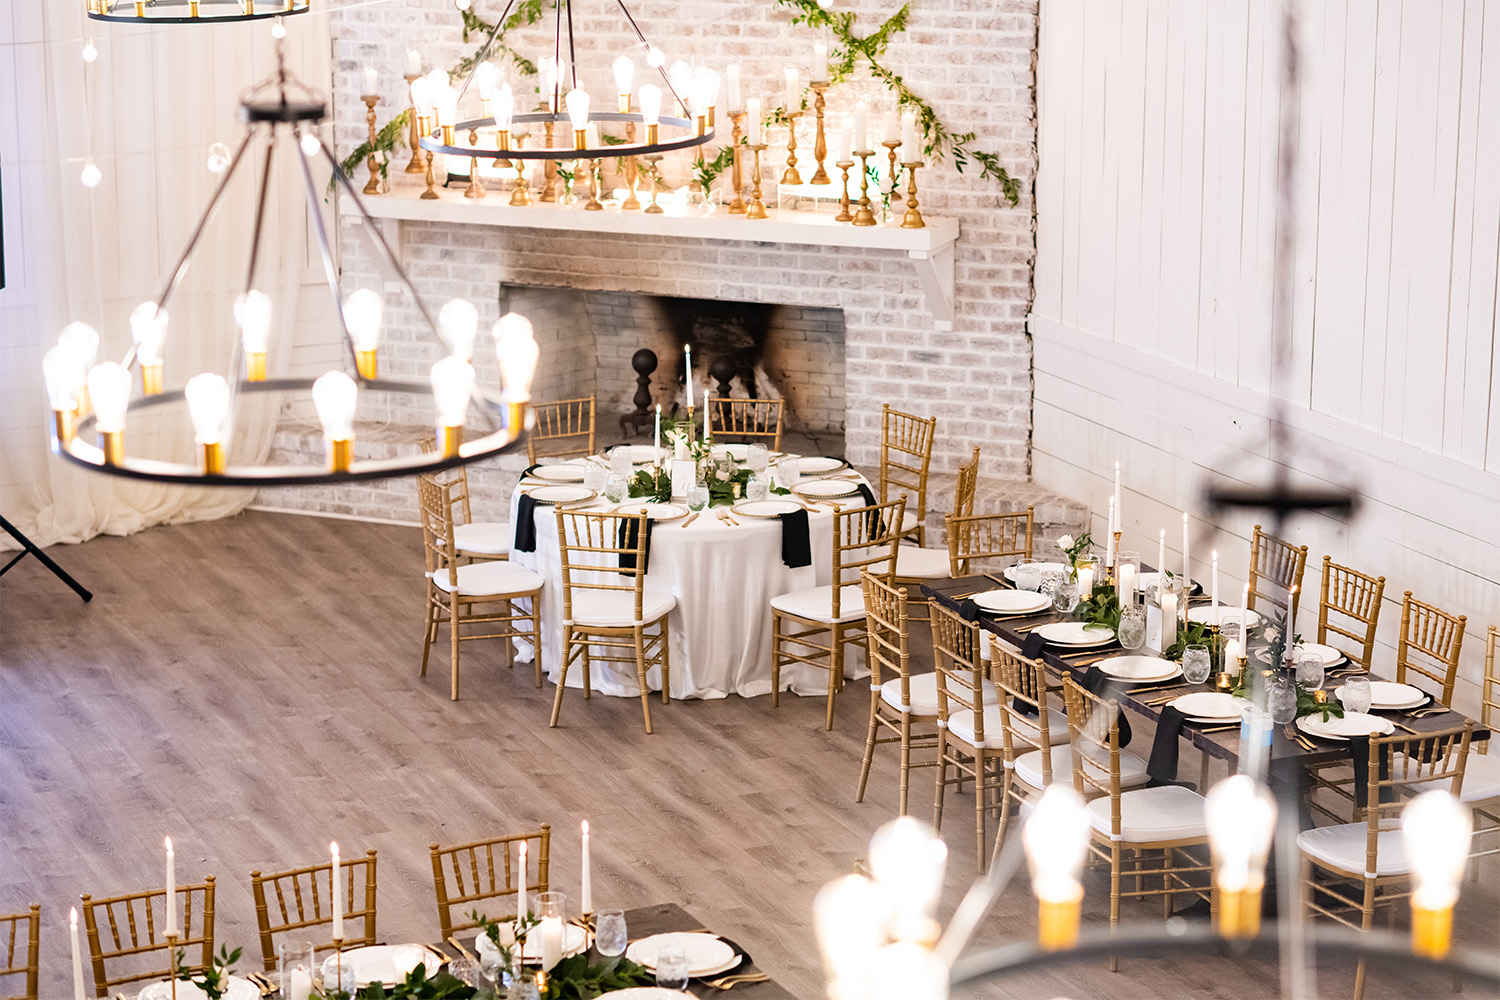 Indoor venue with decorated tables